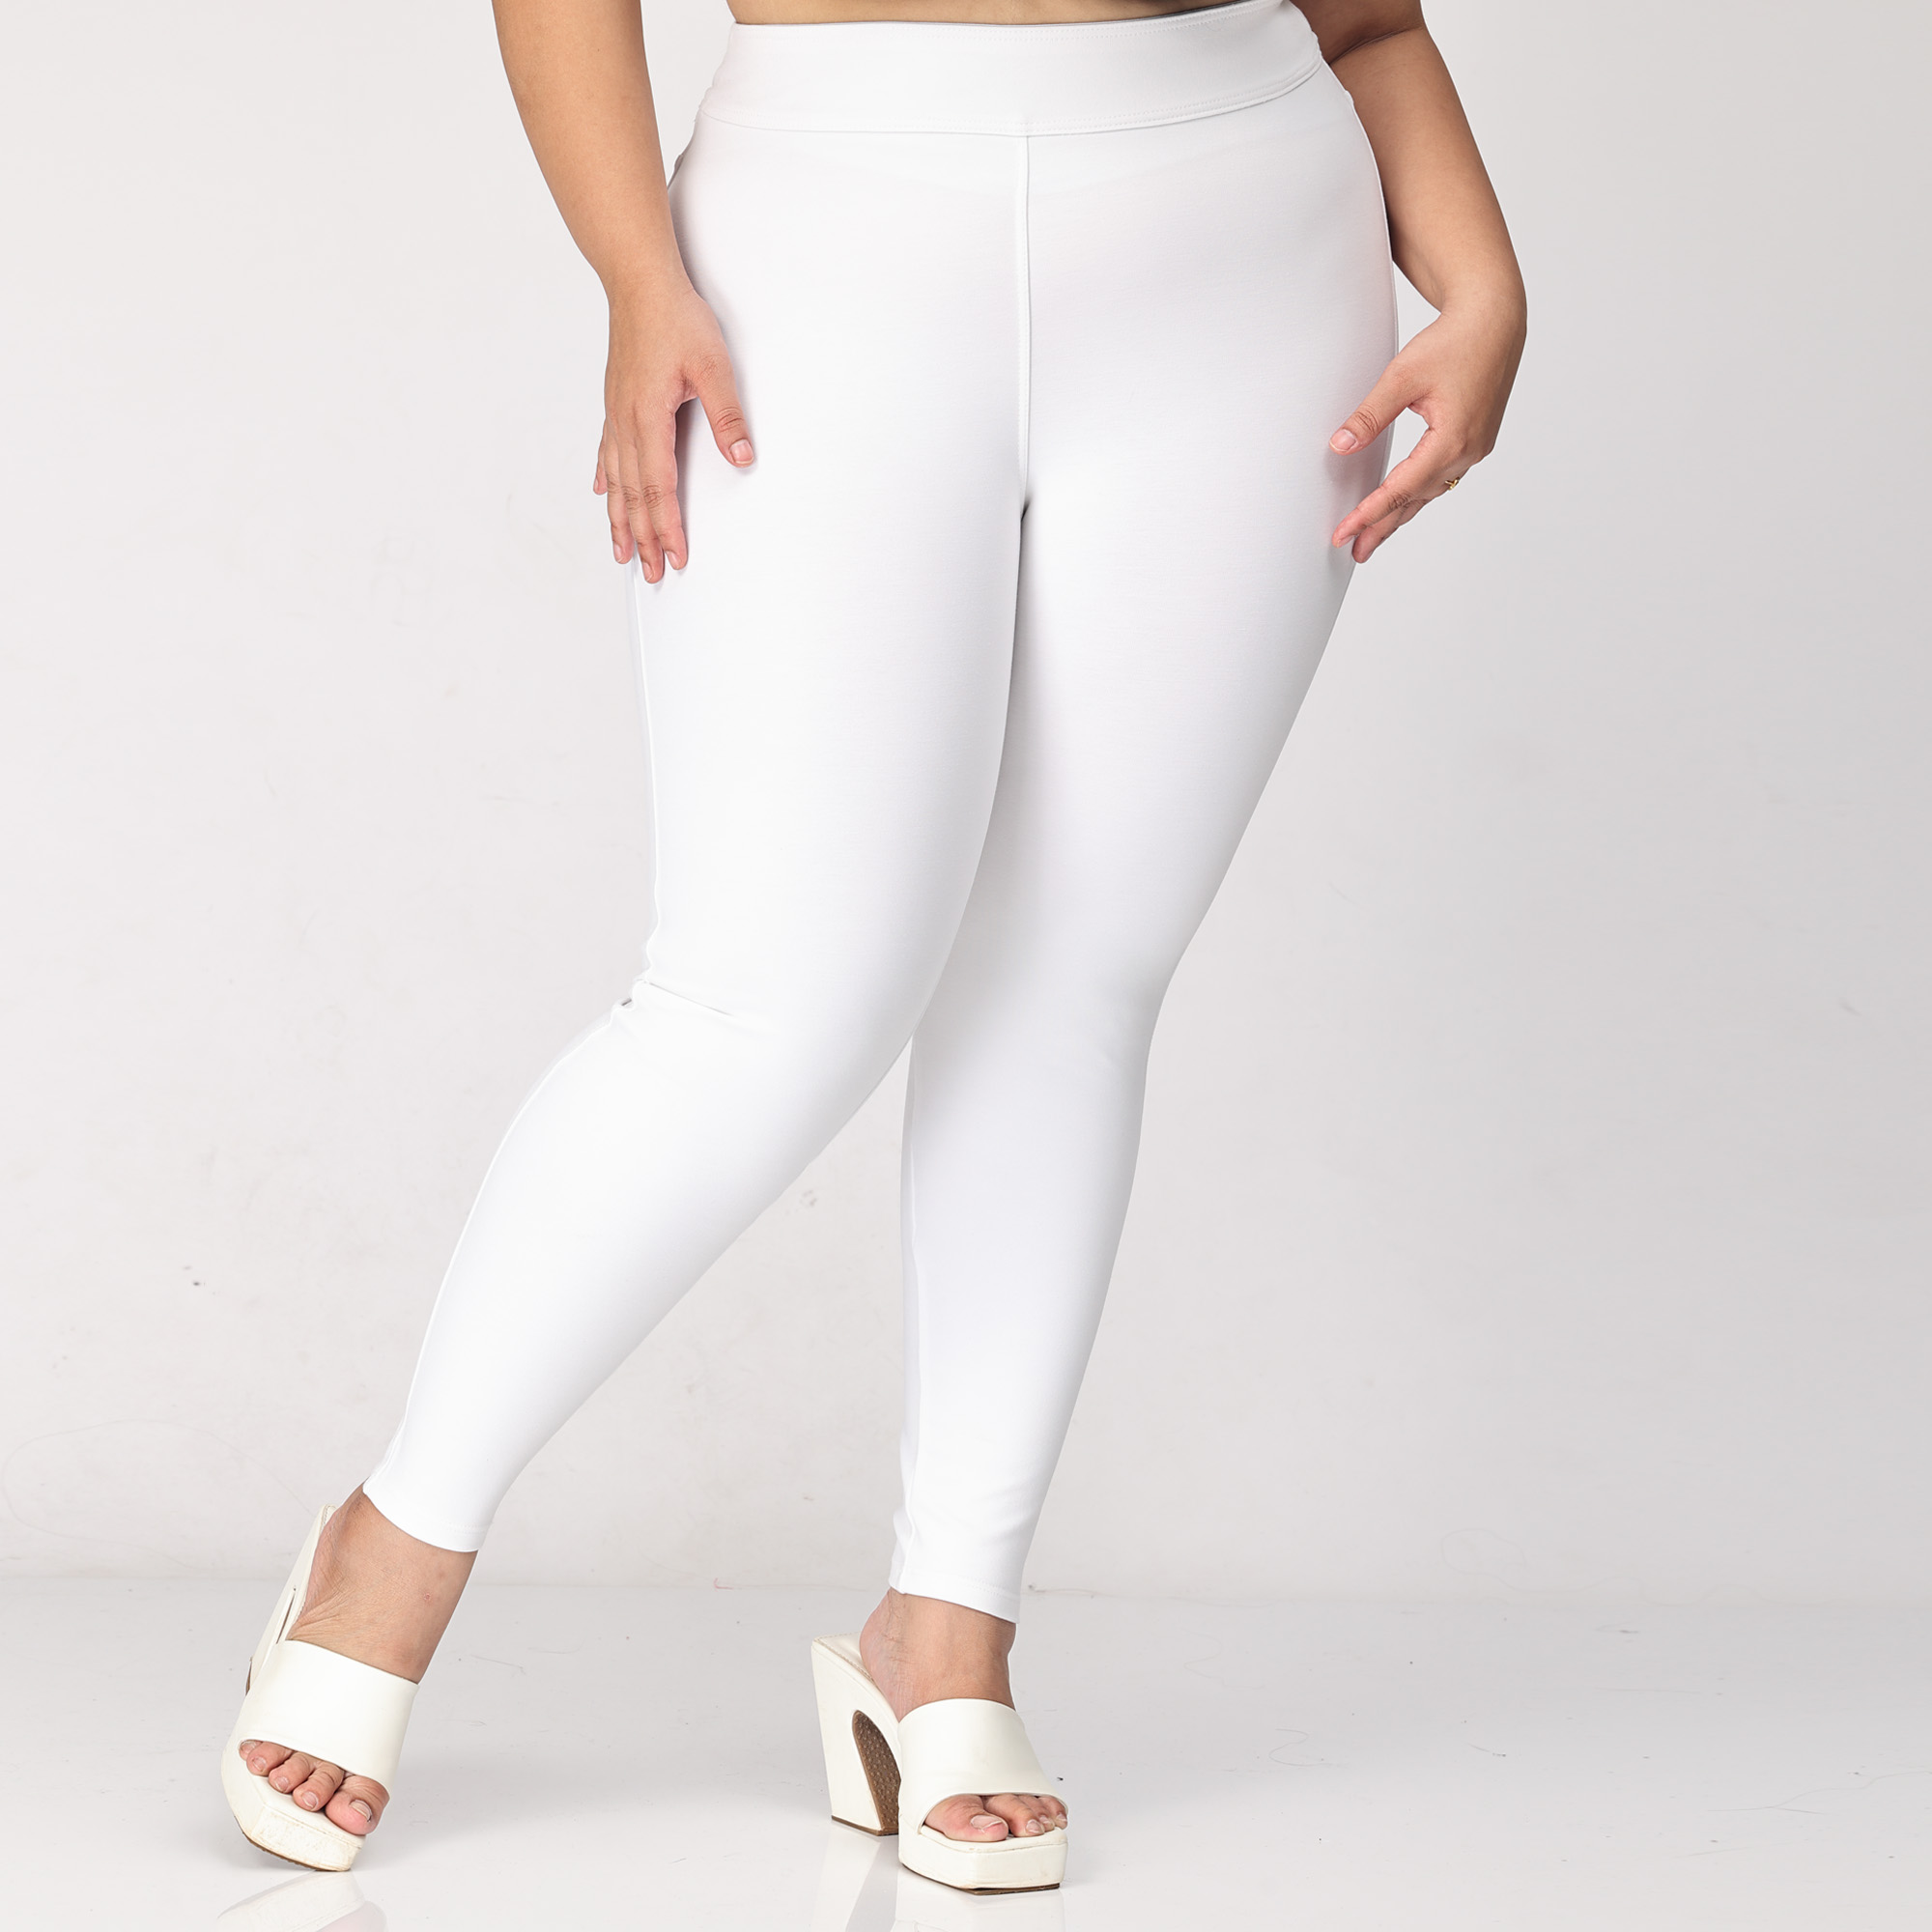 Buy Belore Slims Jeggings for Women Stretchable Ankle Length high